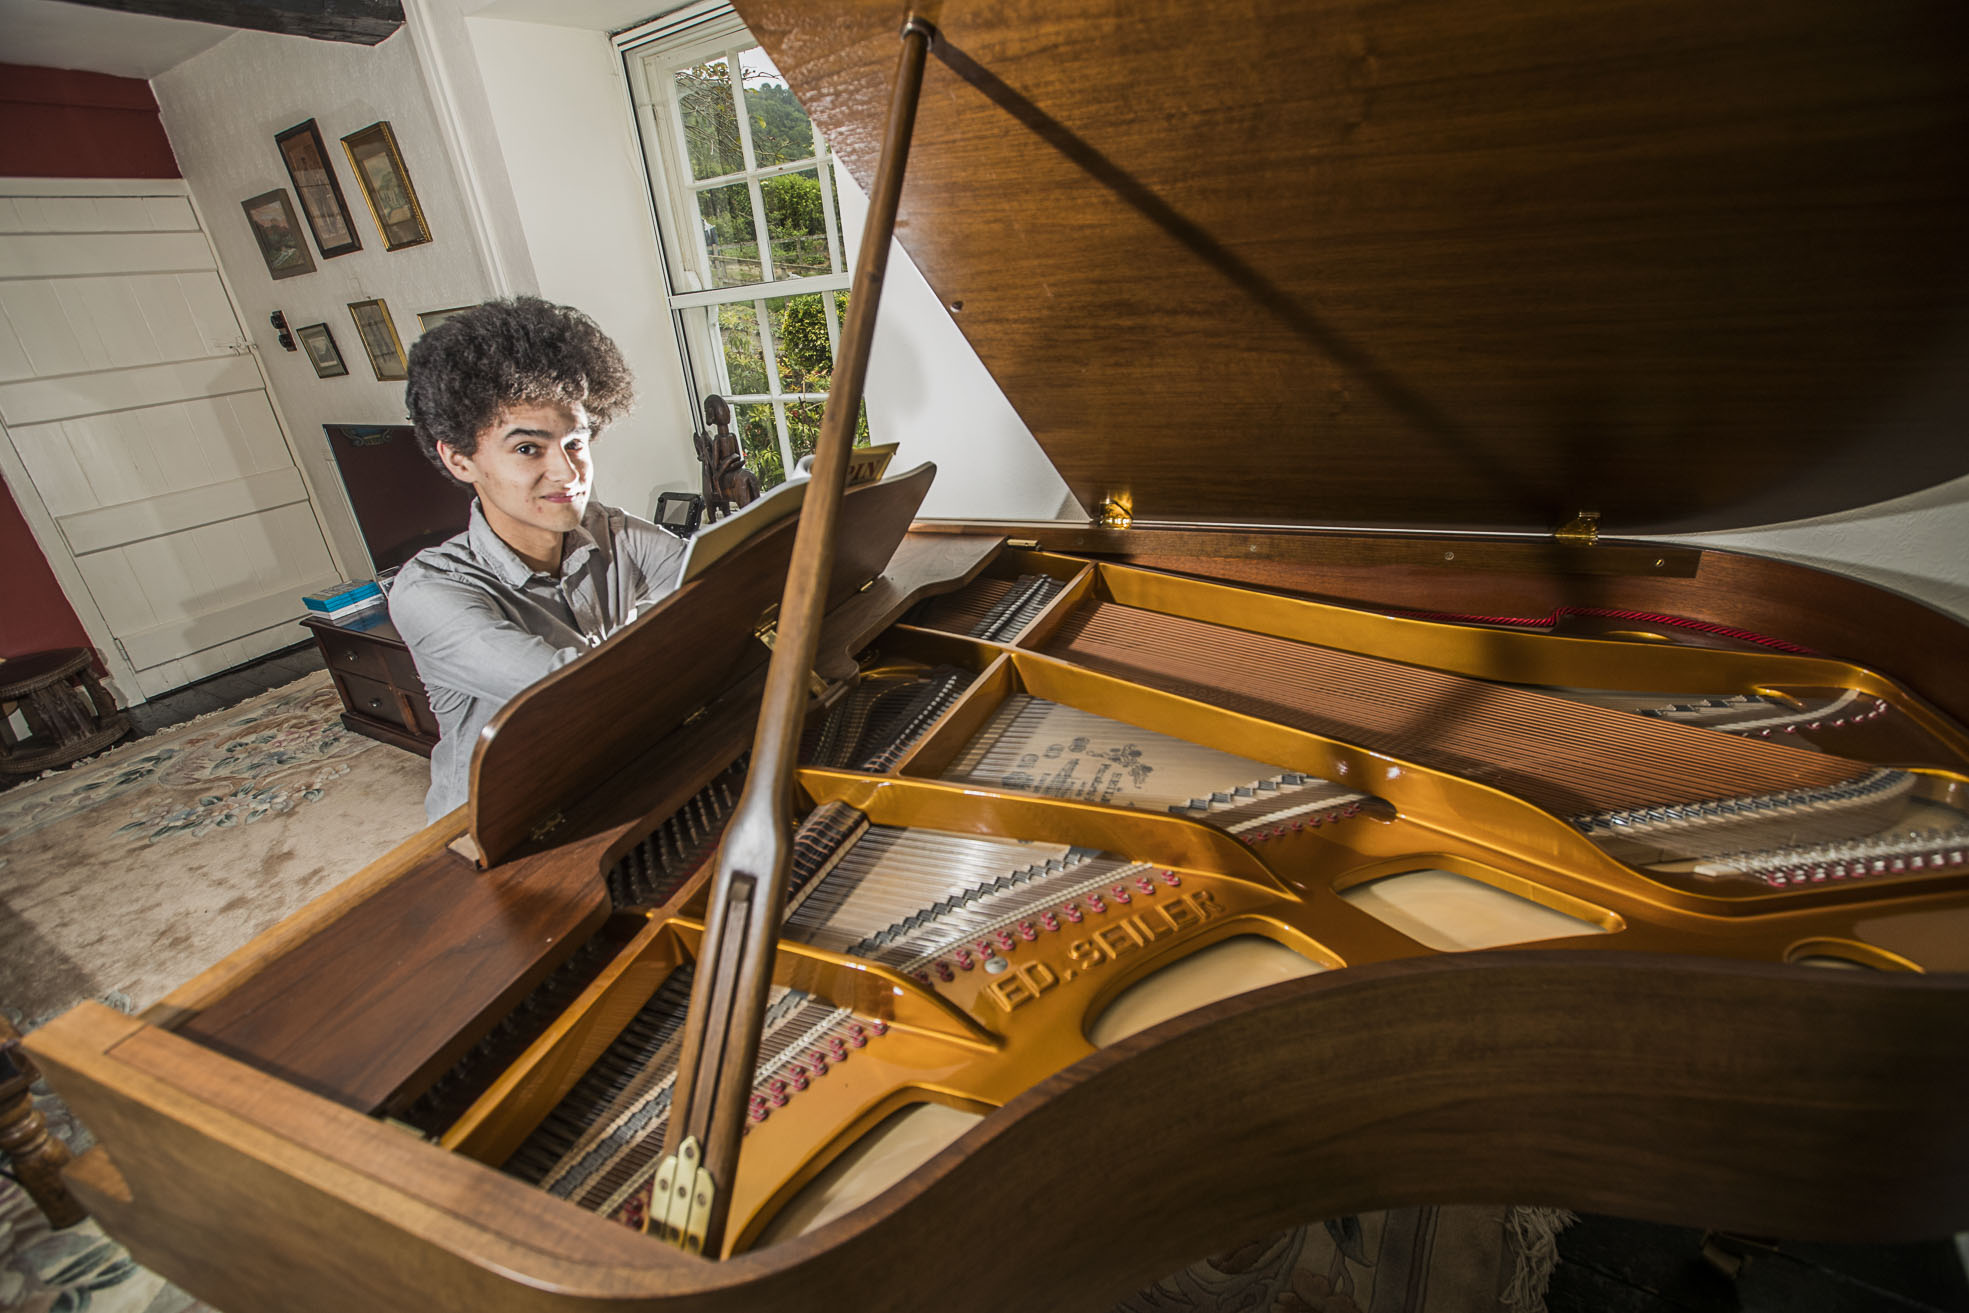 Piano prodigy to perform just hours after his A-level maths exam